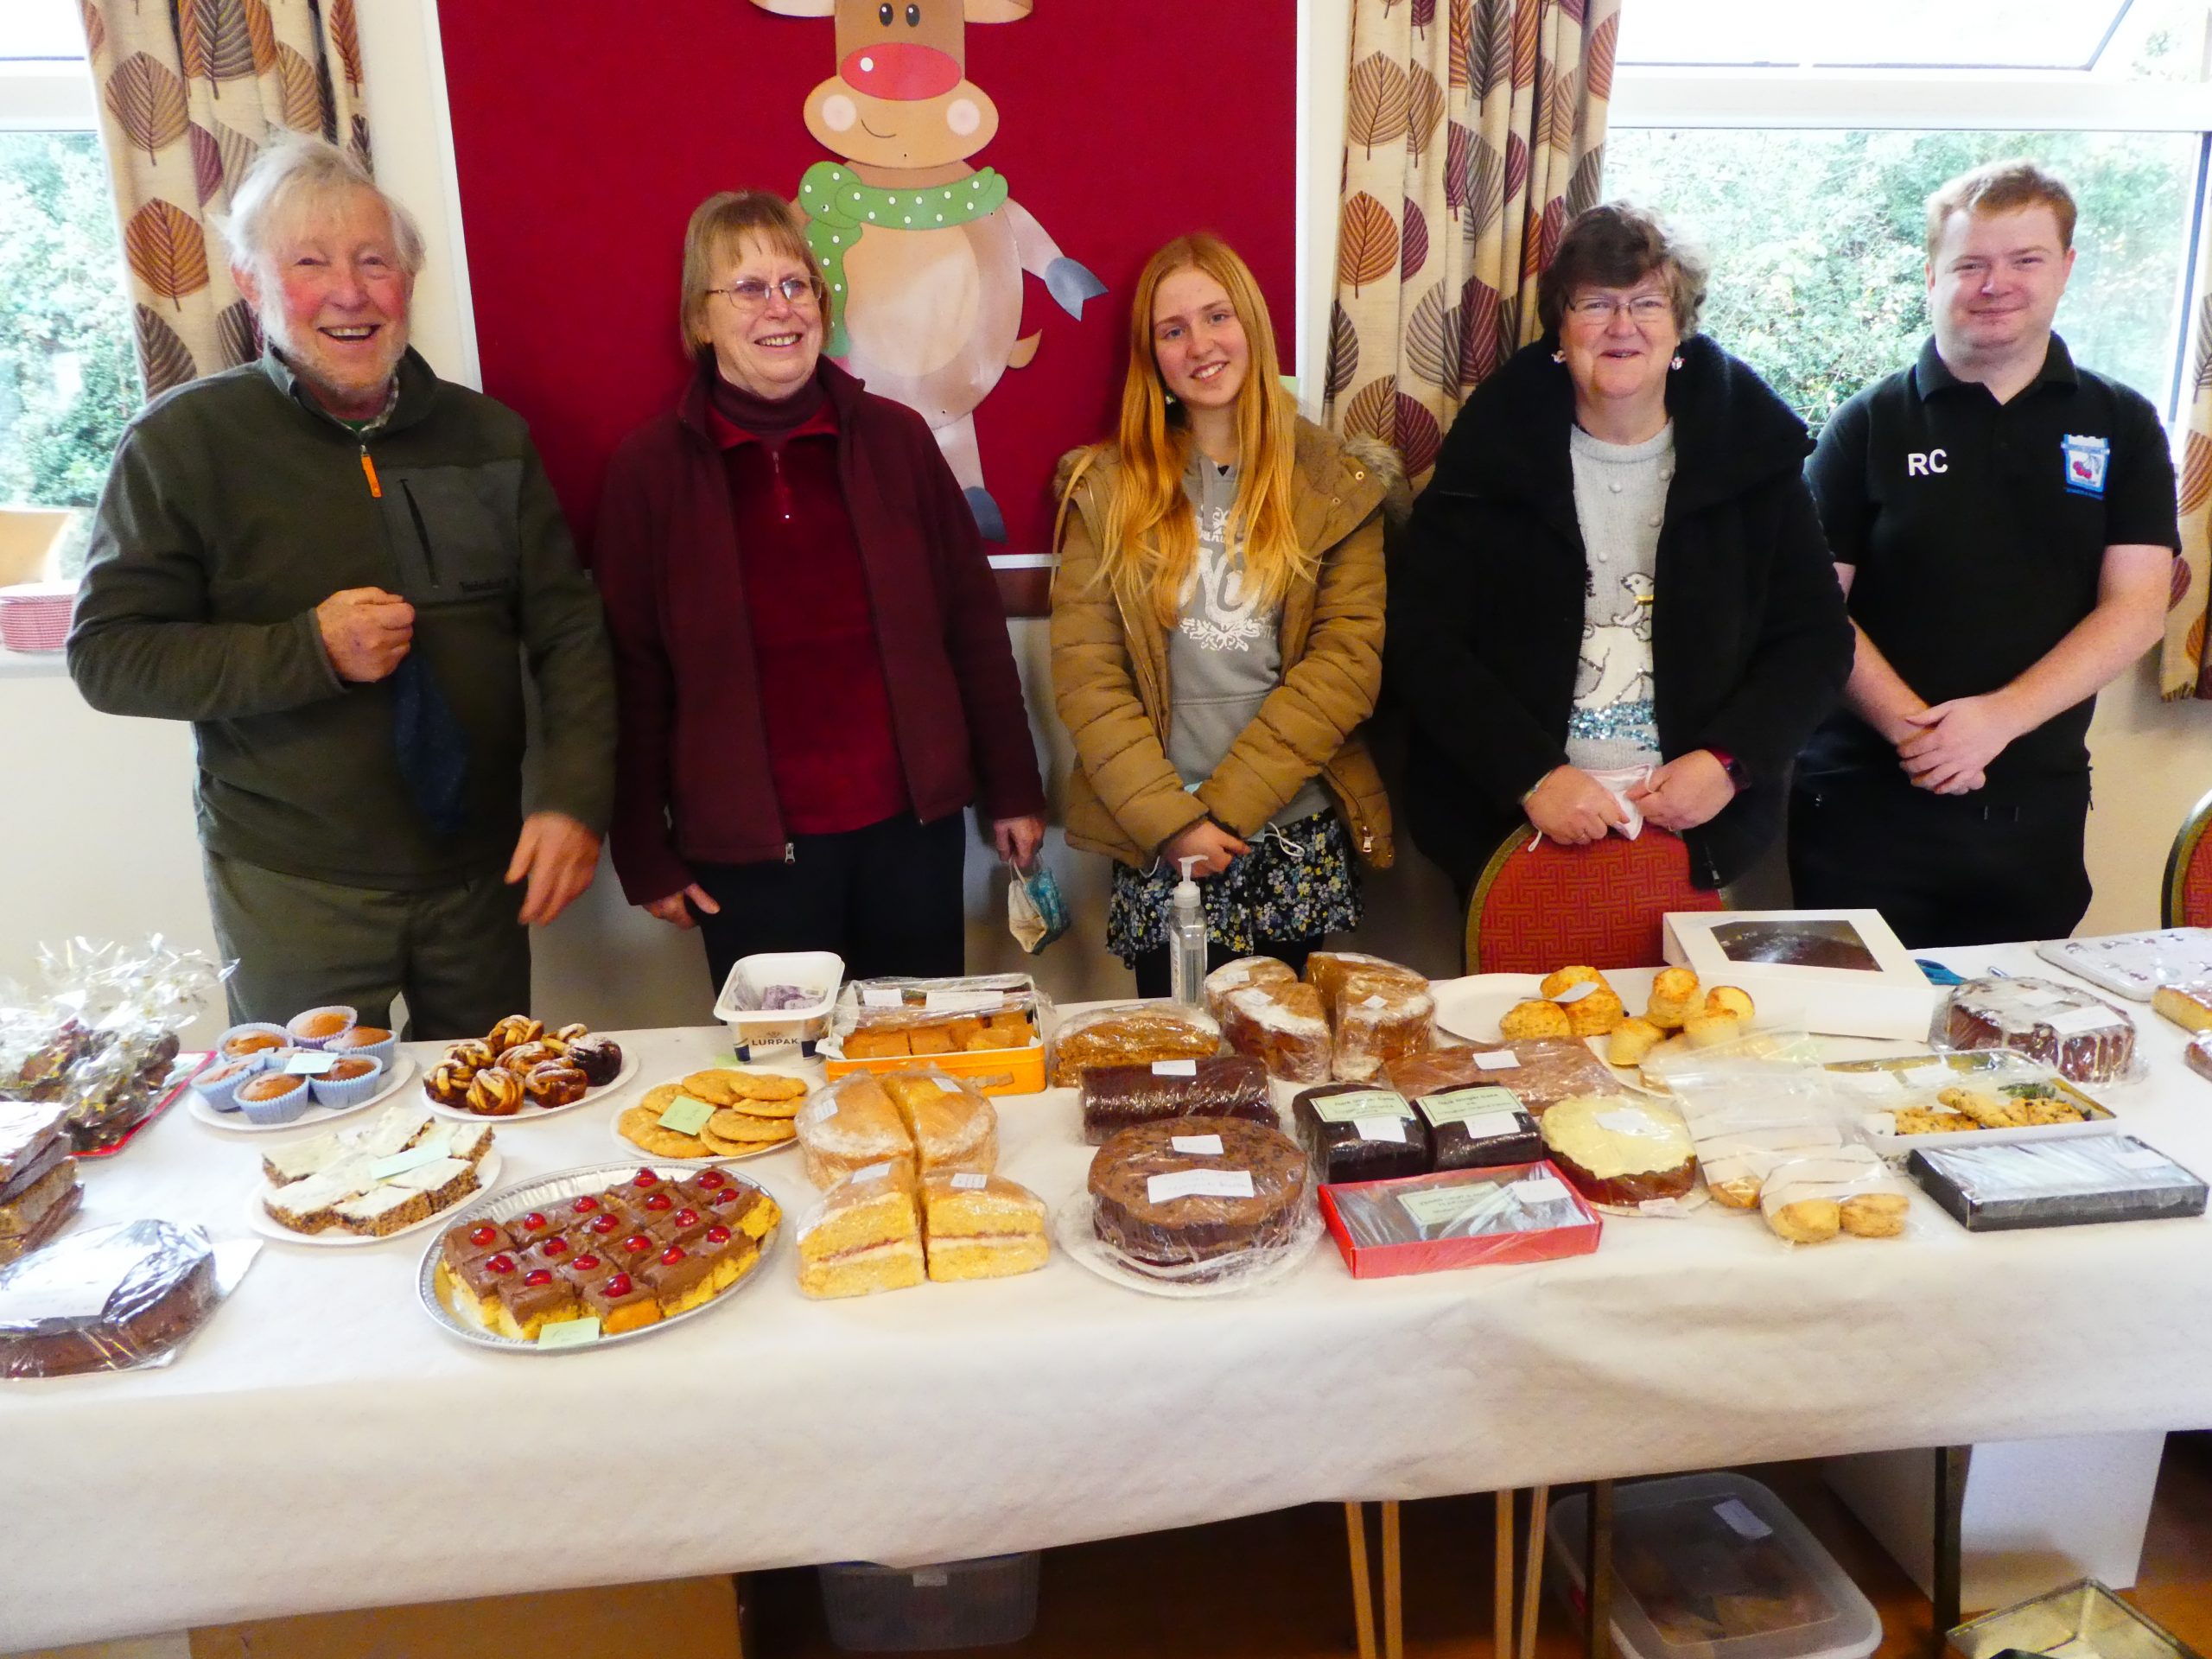 Cake stall raises over £150 for shop funds